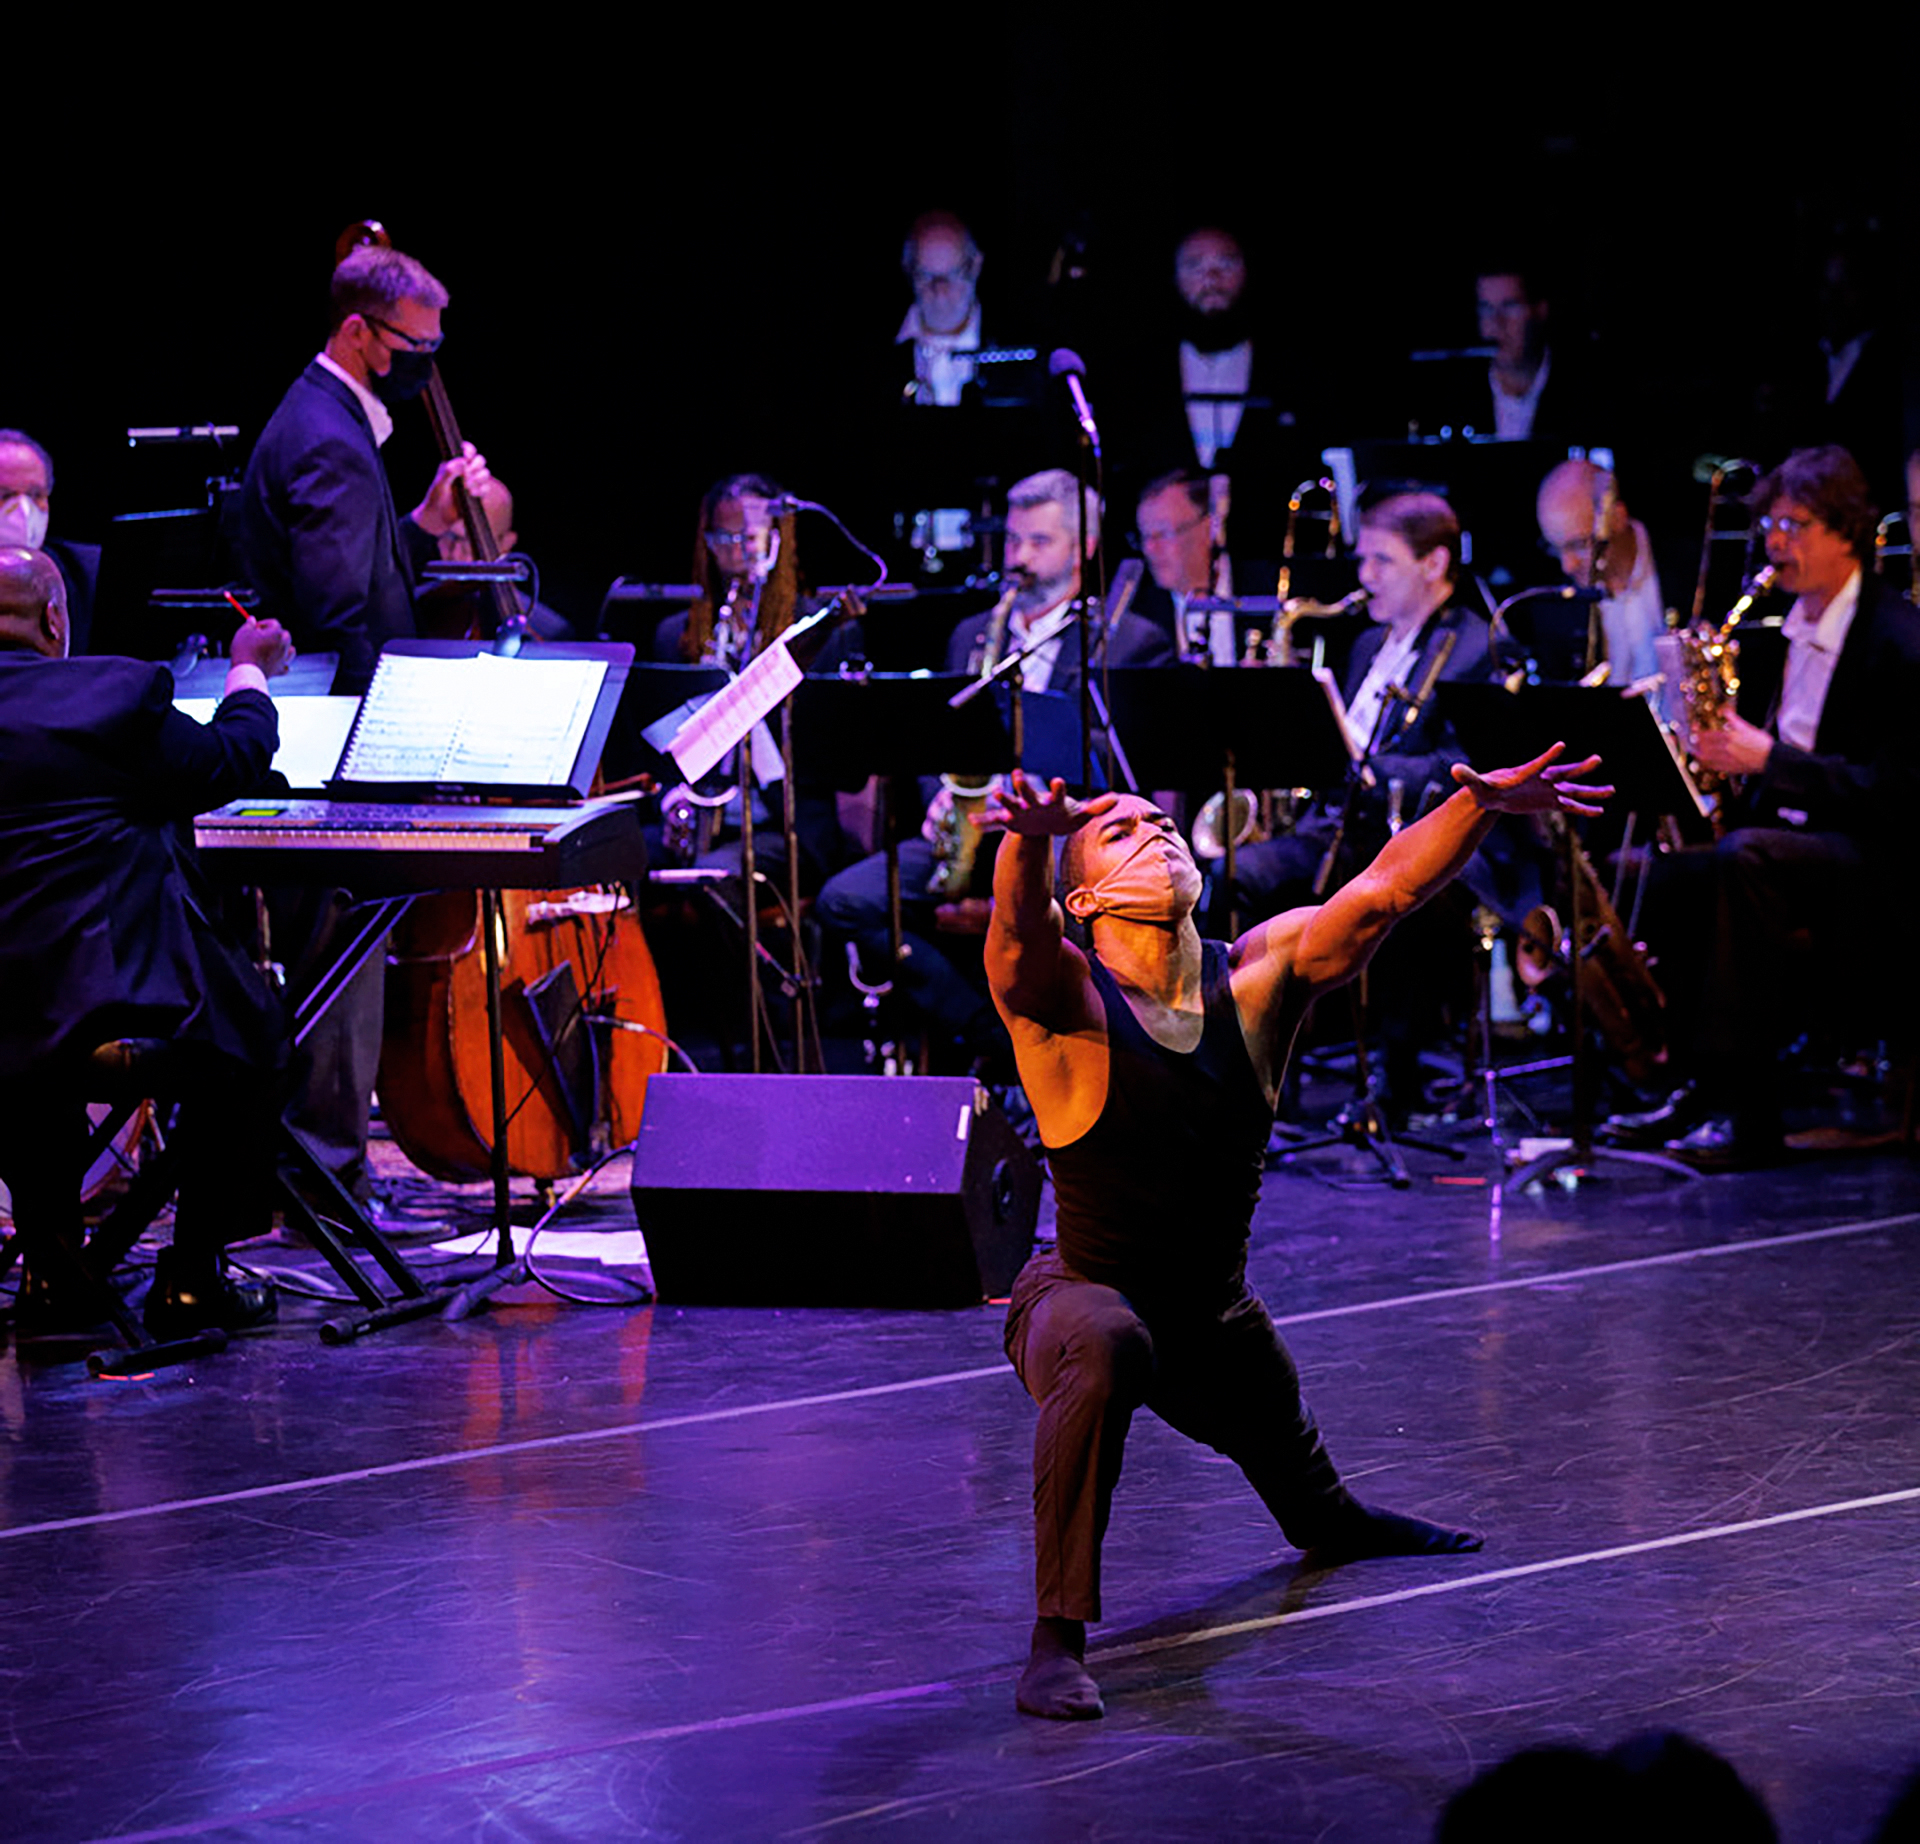 dancer lunging and reaching forward, orchestra playing behind him